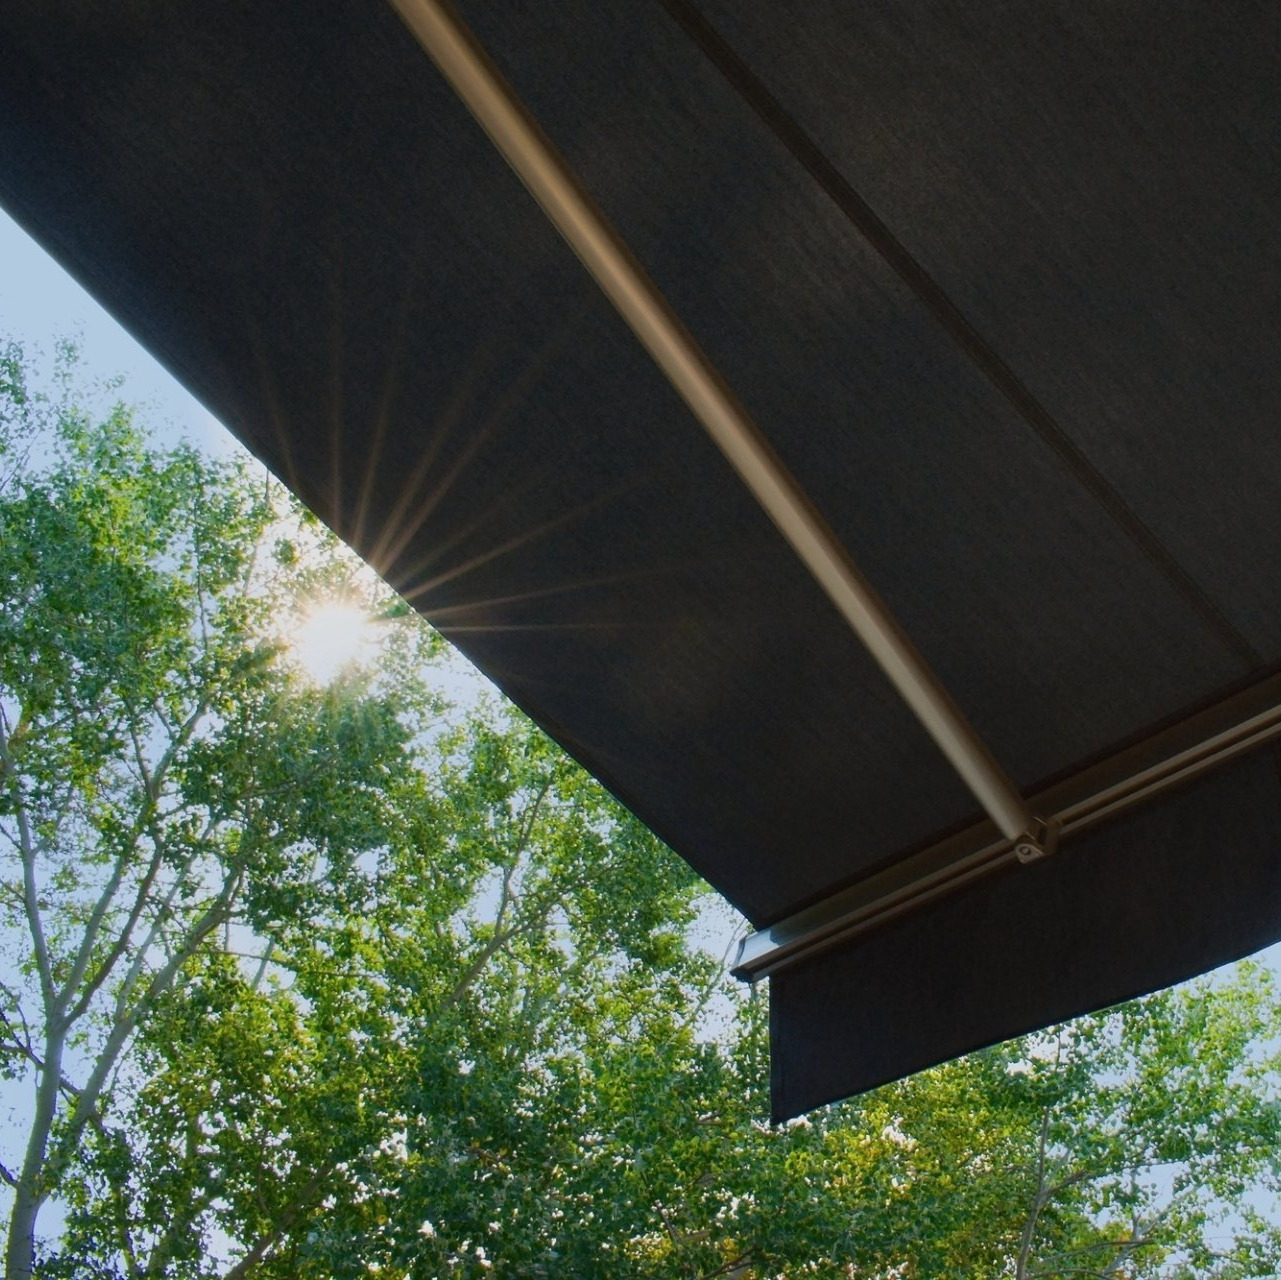 Close up of corner of black outdoor awning, with sun shining through trees in the background.